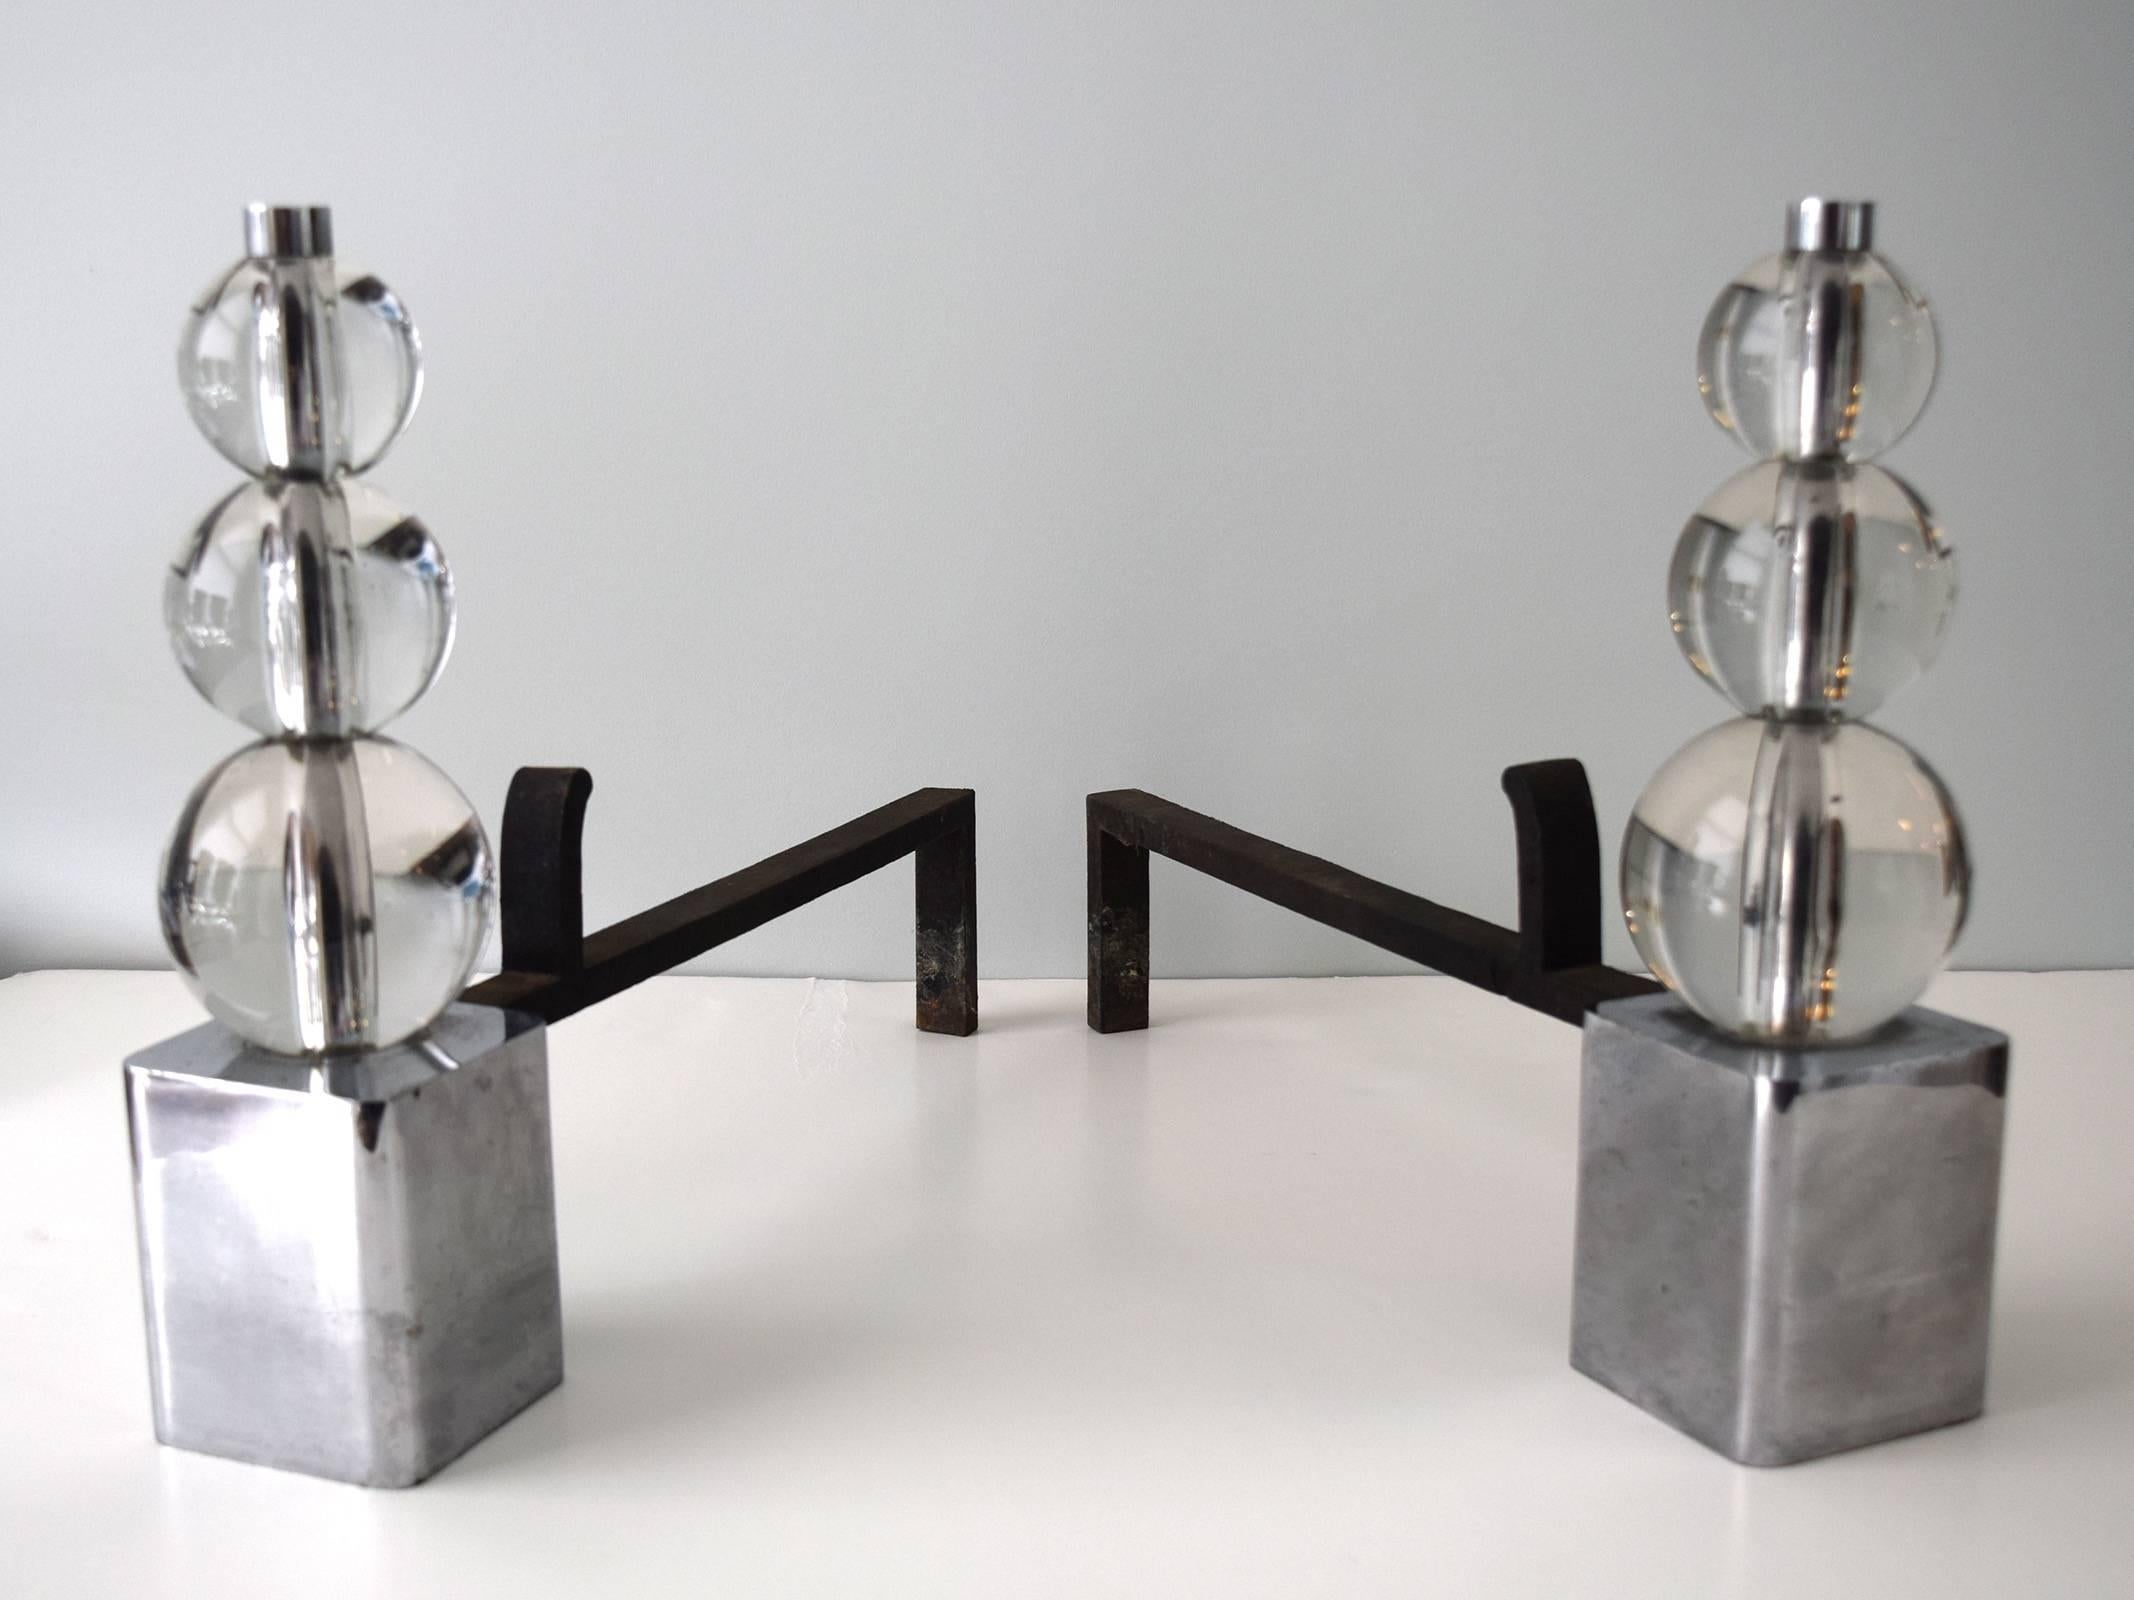 Art Deco Steuben Glass Andirons with Chrome-Plated Bases from the 1930s